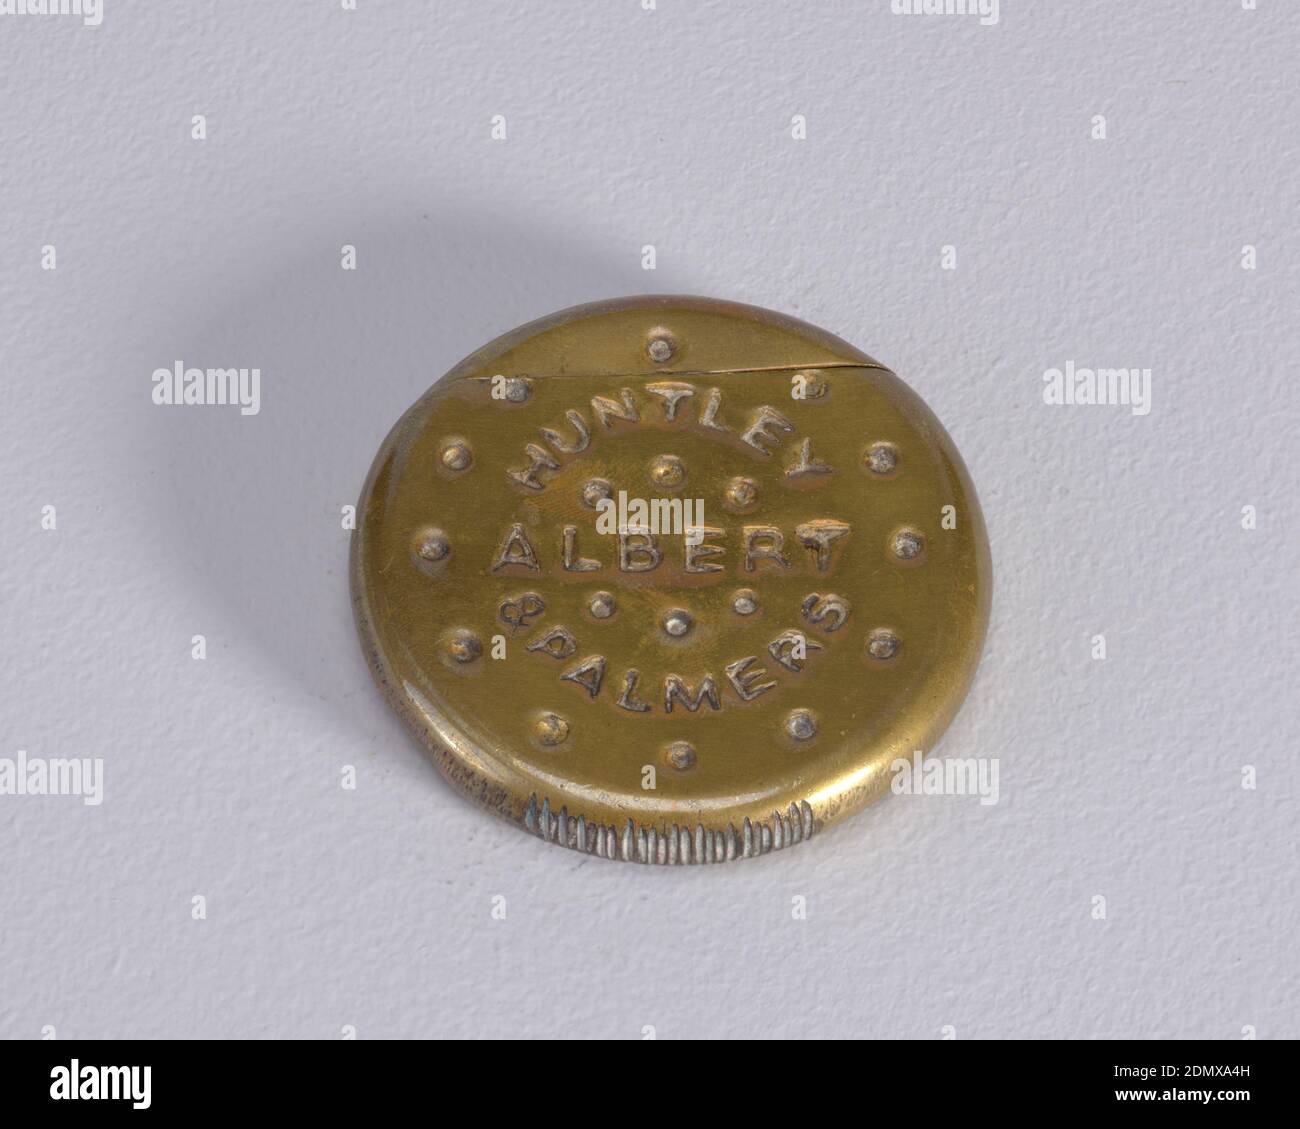 Huntley & Palmers 'Albert' Biscuit, Brass, Circular, in the form of a biscuit, with small, dot-like, simulated perforations on front surface, inscribed 'Huntley & Palmers,' 'Albert.' On reverse are small, vertical and horizontal, dash-like, simulated perforations. Outer circumference of box displays irregular, scratch-like marks in surface. Lid, or upper portion of biscuit, hinged on back. Striker on bottom edge., ca. 1890, containers, Decorative Arts, Matchsafe, Matchsafe Stock Photo